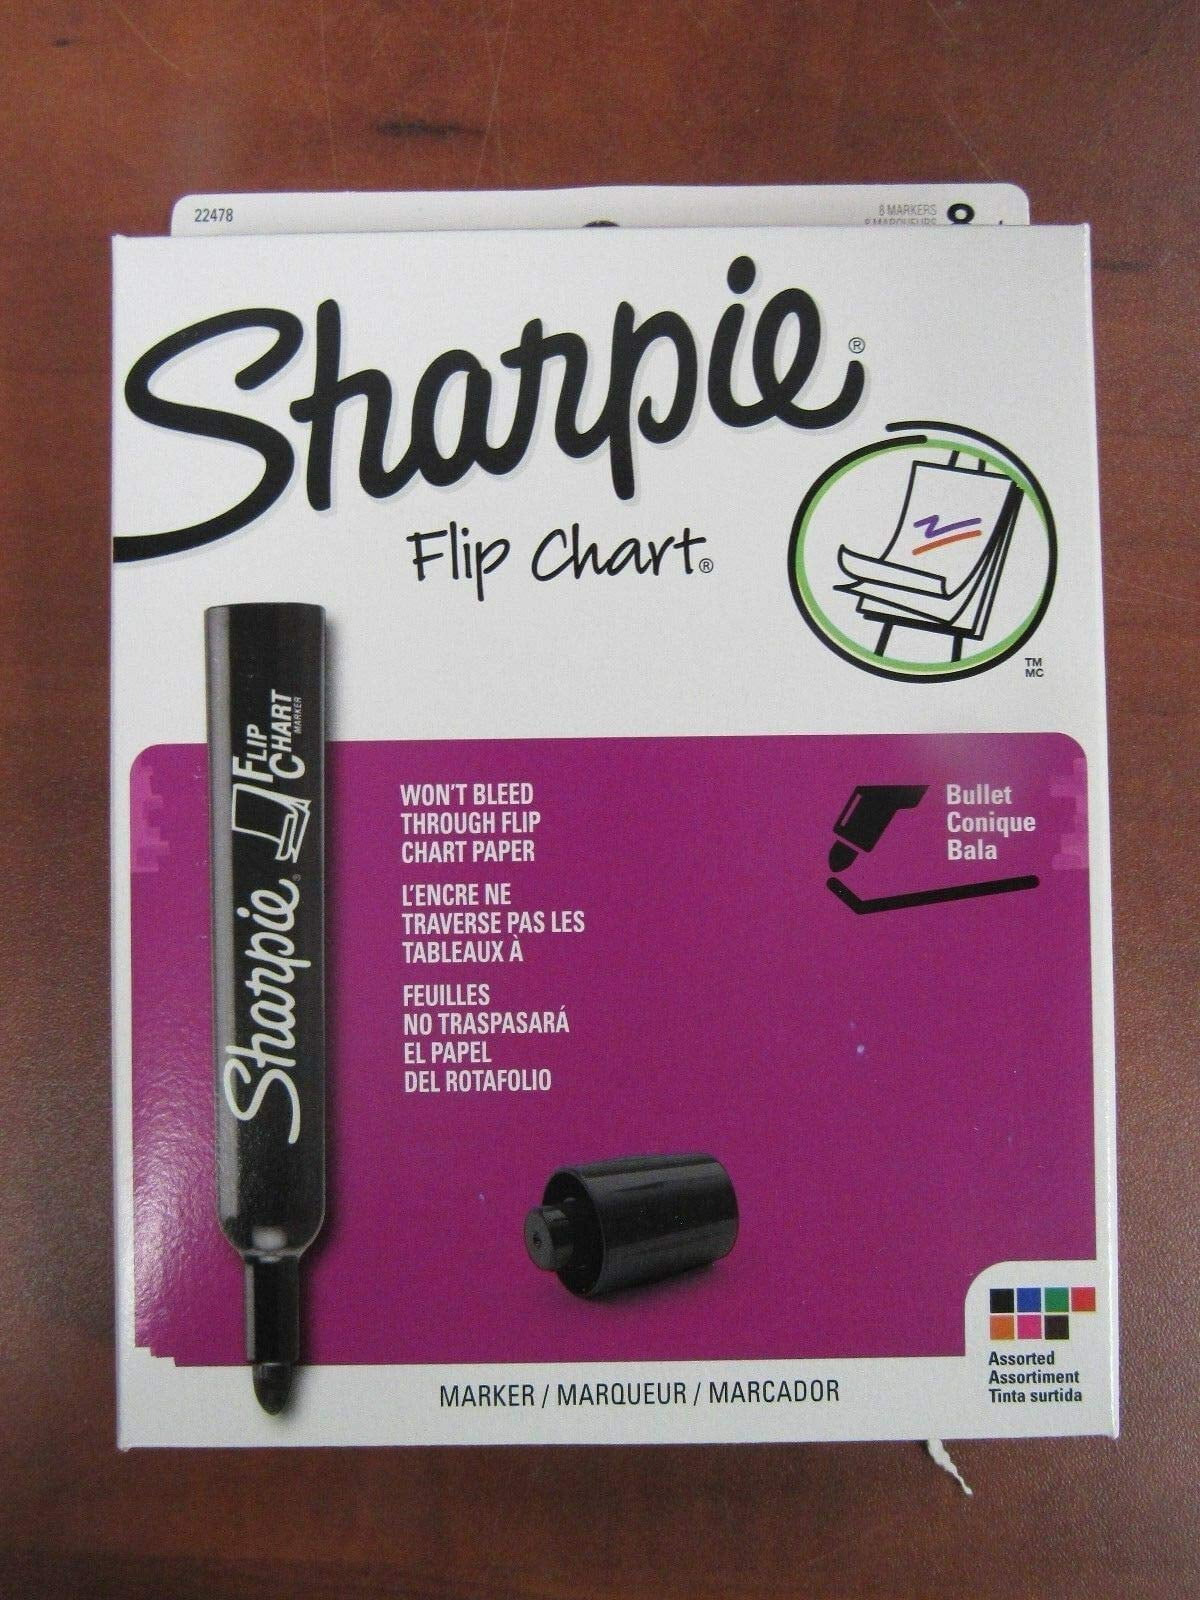 Case of 12 Packs of Flip Chart Sharpie Permanent Markers Box of 8